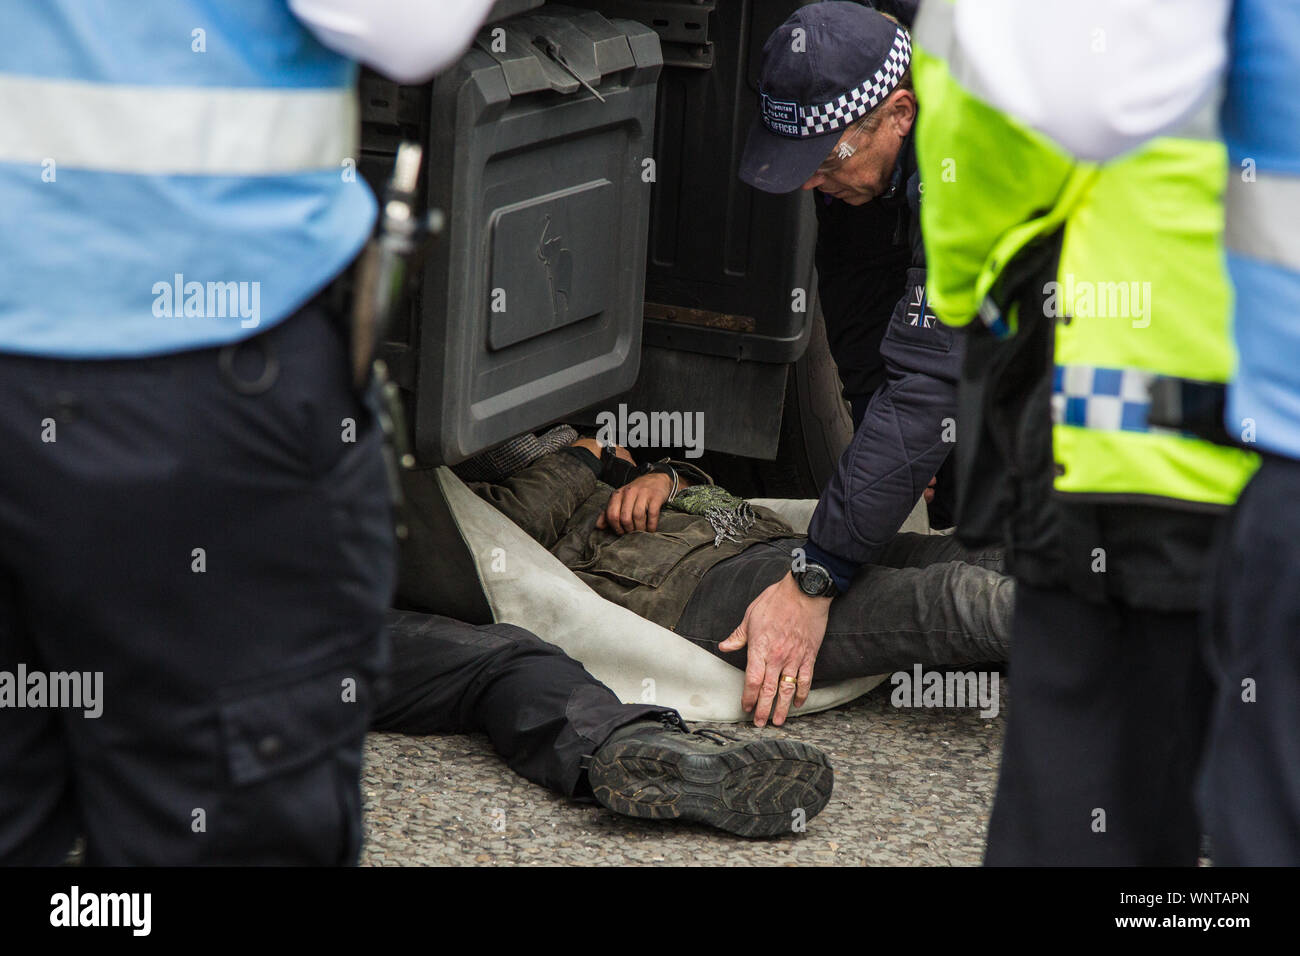 London, UK. 6 September, 2019. Metropolitan Police officers remove and arrest an activist who had locked herself beneath a truck making a delivery to ExCel London for DSEI, the world’s largest arms fair. The road remained blocked for several hours. The fifth day of protests against the arms fair was themed as Stop The Arms Fair: Stop Climate Change in order to highlight links between the fossil fuel and arms industries. Credit: Mark Kerrison/Alamy Live News Stock Photo